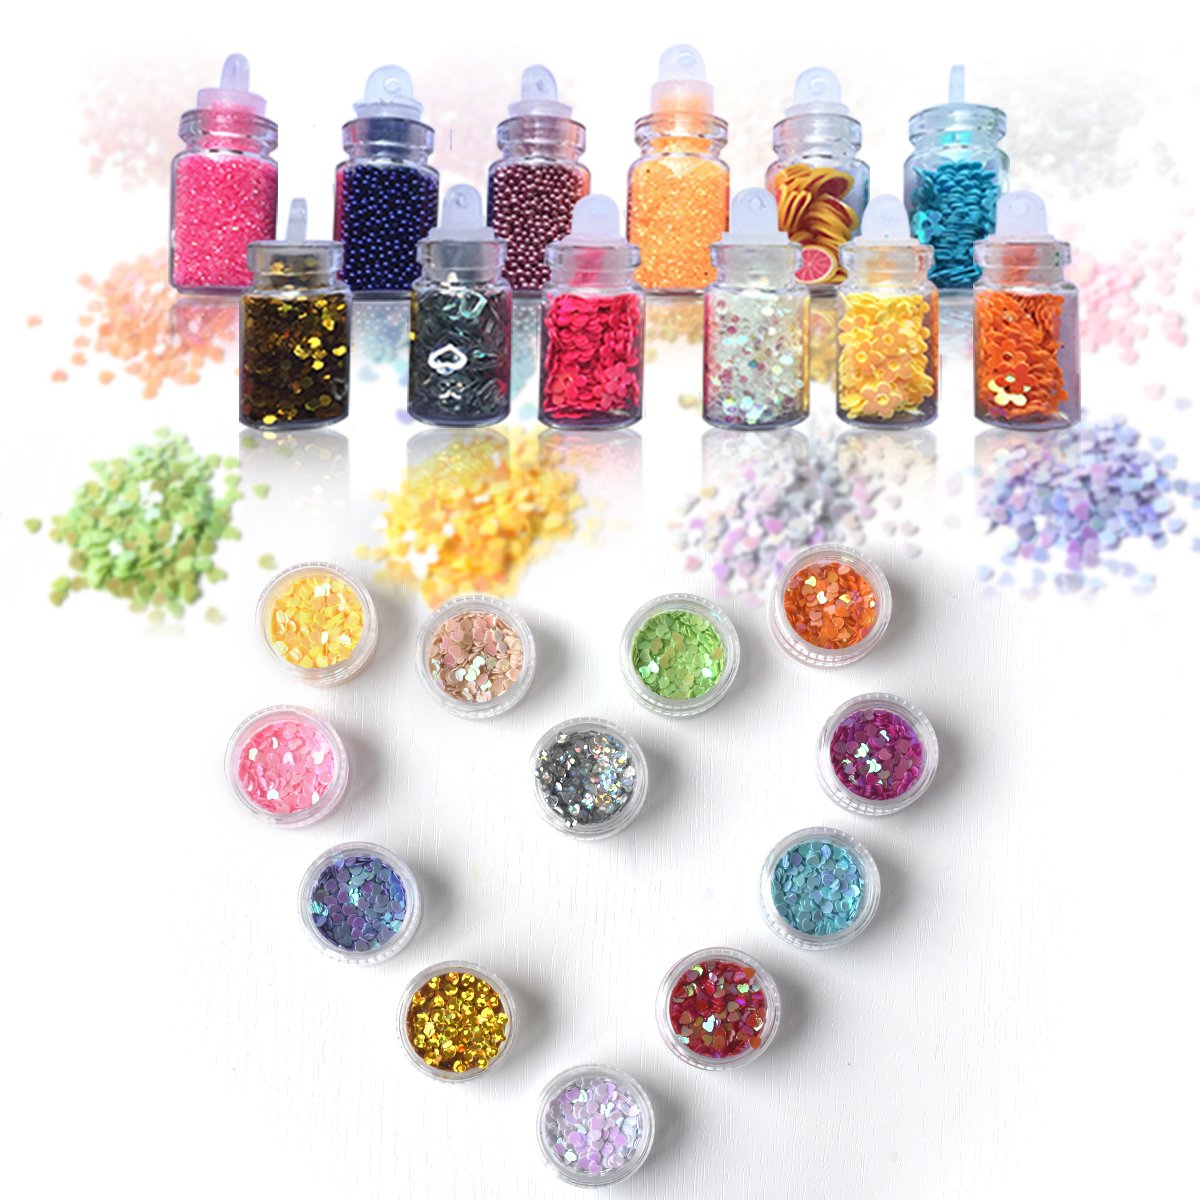 Hulluter 70PCS Slime Kit with Foam Beads, Glitter, Charms and More for DIY  Slime Making